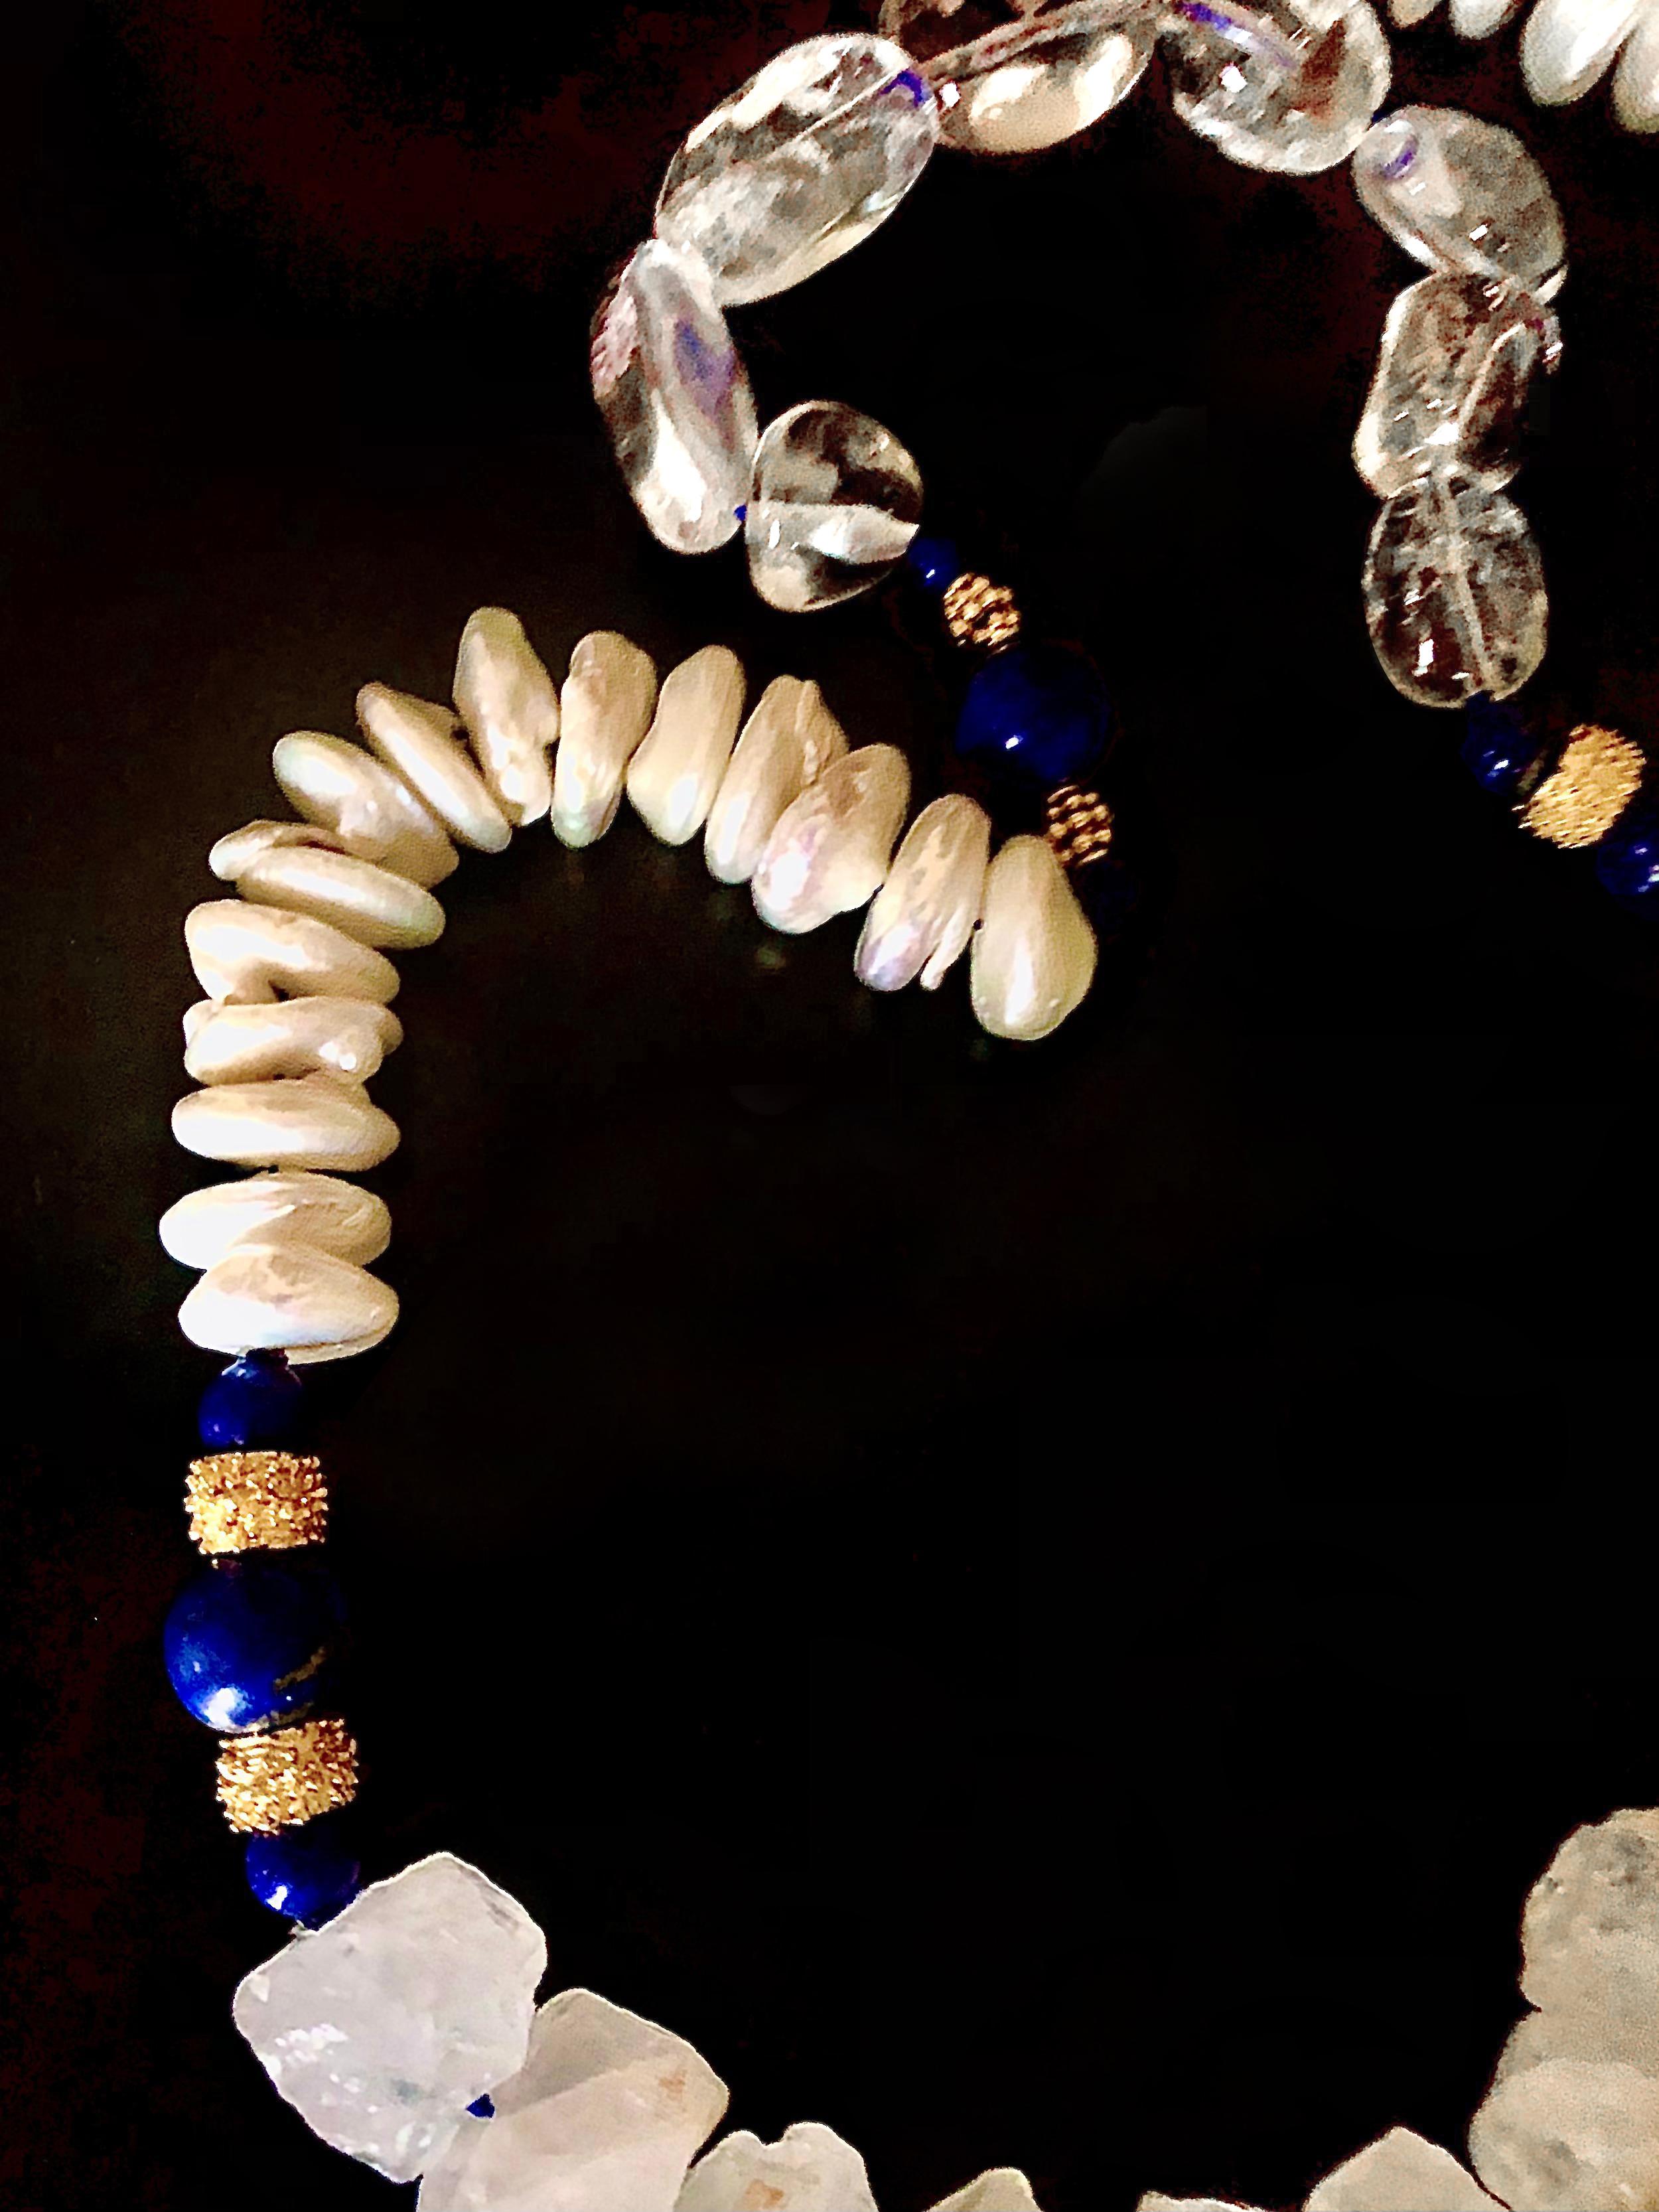 Sautoir with elegant, interesting mélange of freshwater lustrous cultured coin pearls, lapis lazuli beads and large tumbled rock crystal nuggets both smooth and crystalline. The piece is accented with richly gilded brass granulated rondelles. All